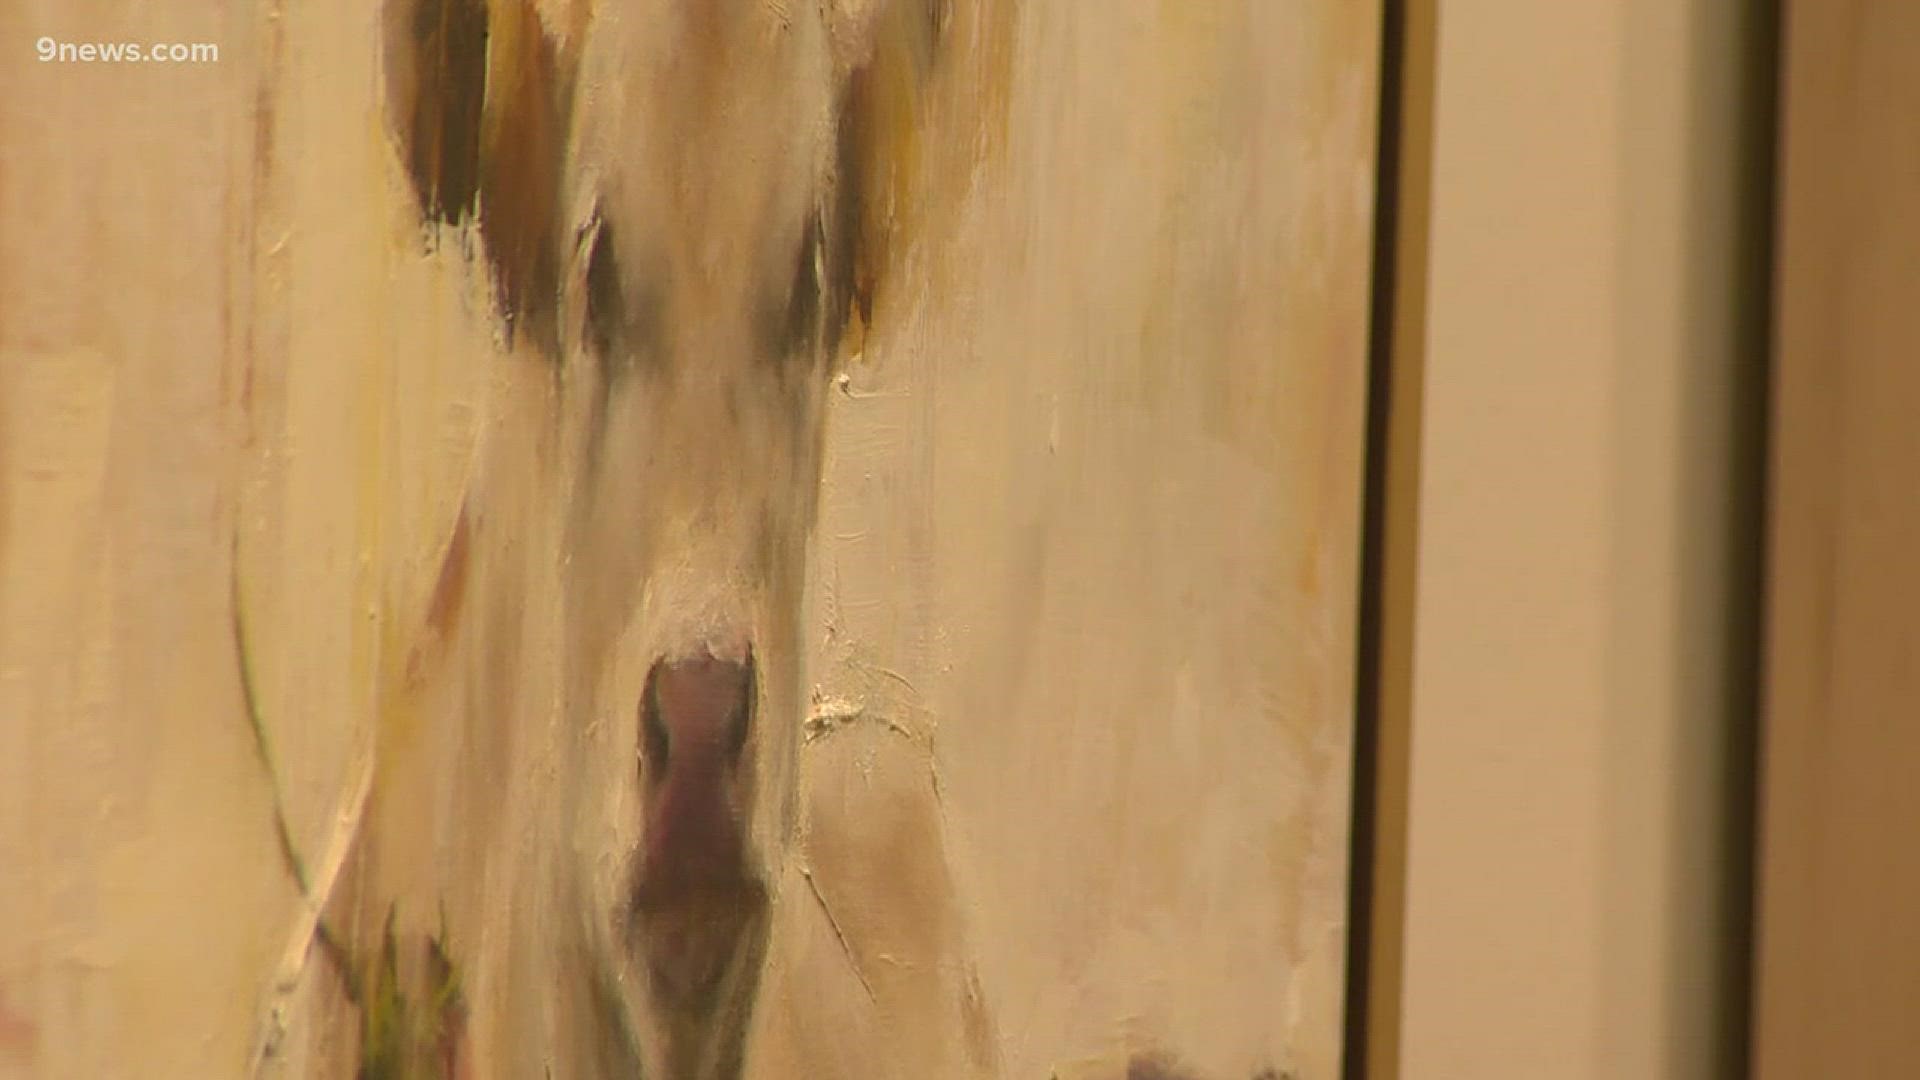 The National Western Stock Show isn't all just bull riding, cattle auctions and cowboys. For 26 years the best in western art has been on display at the Coors Western Art Exhibit.